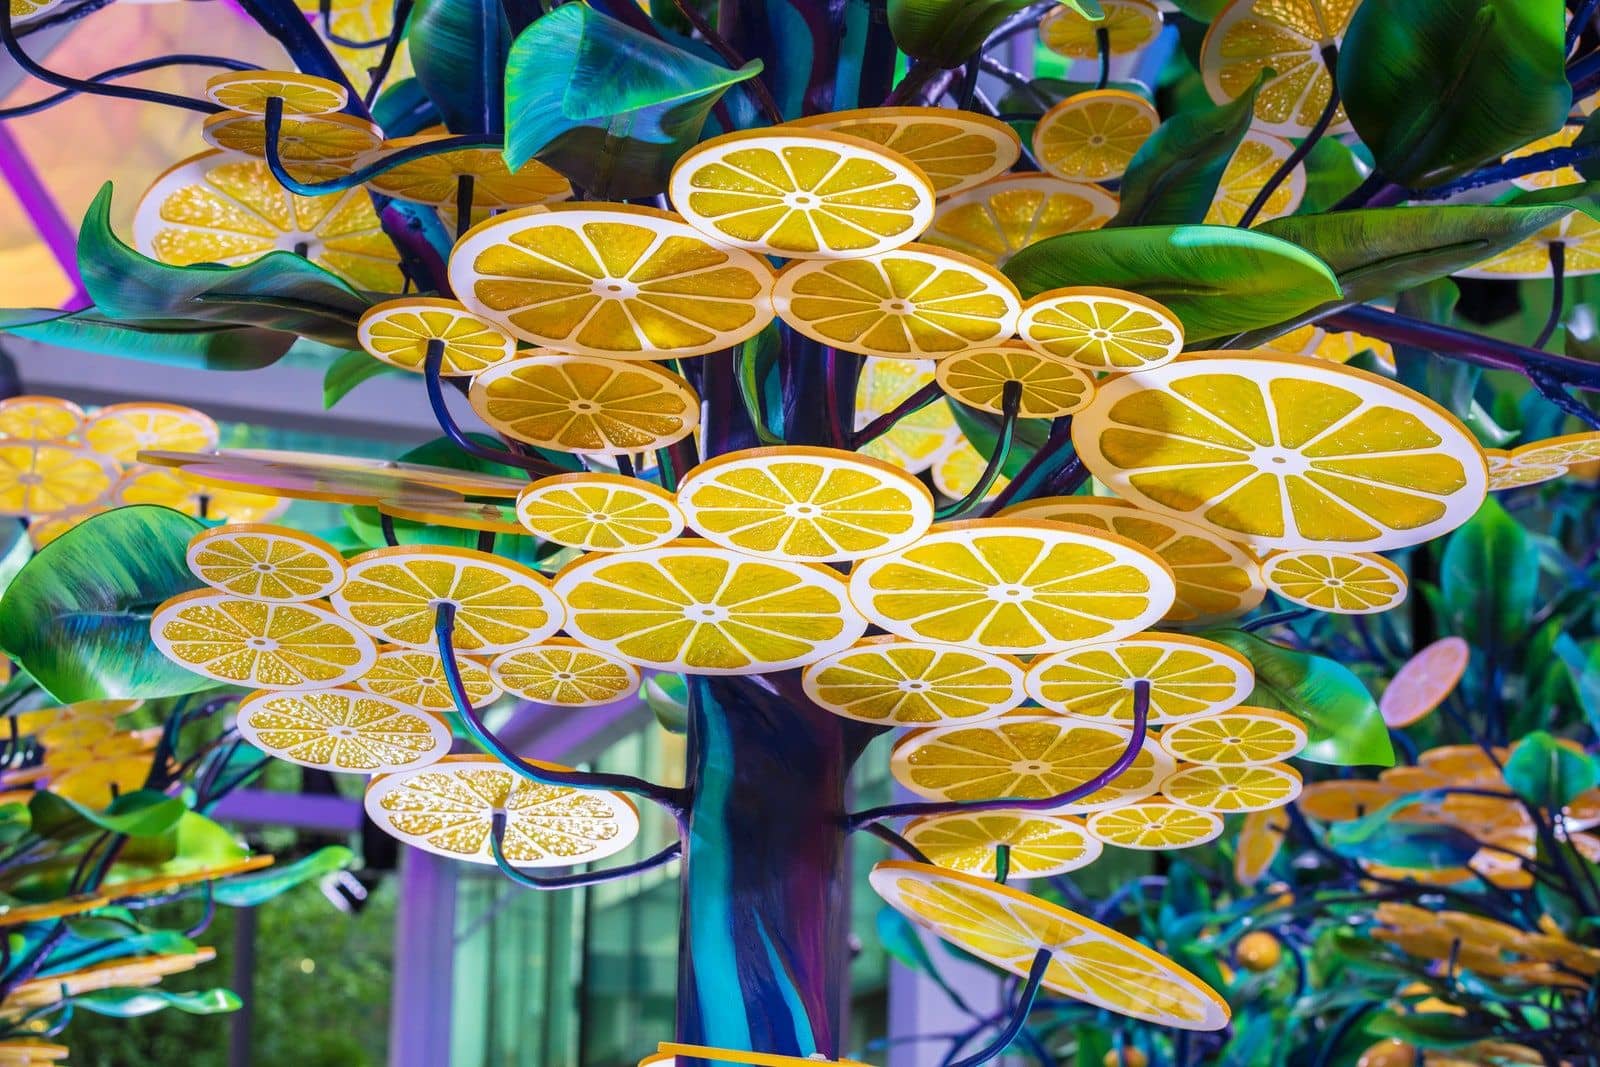 Vibrant lemon slice canopy featured in the Citrovia installation at Manhattan West.